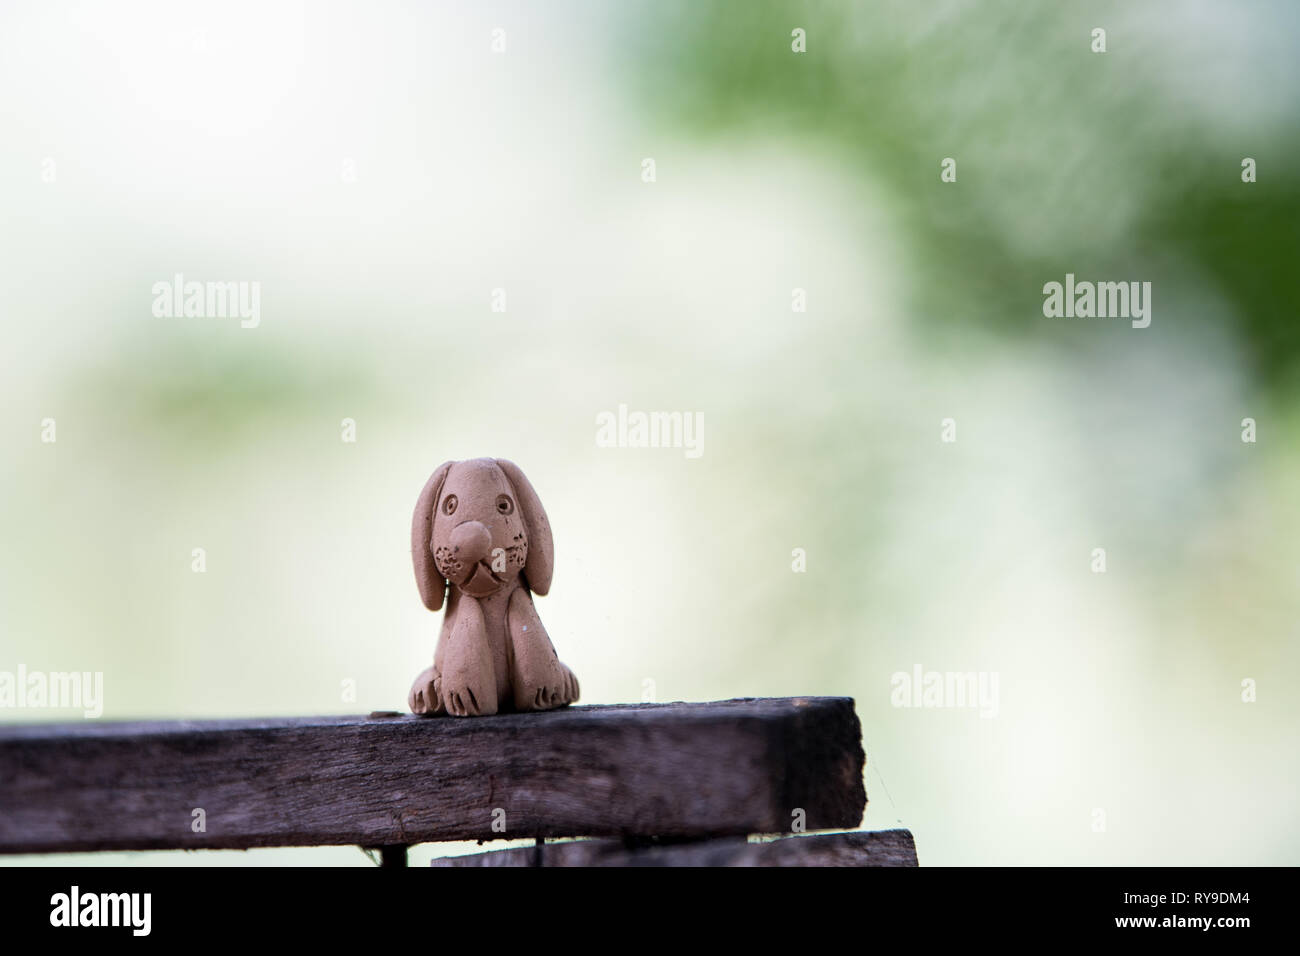 Clay doll dog, molded from clay and through heat, on wood. Stock Photo